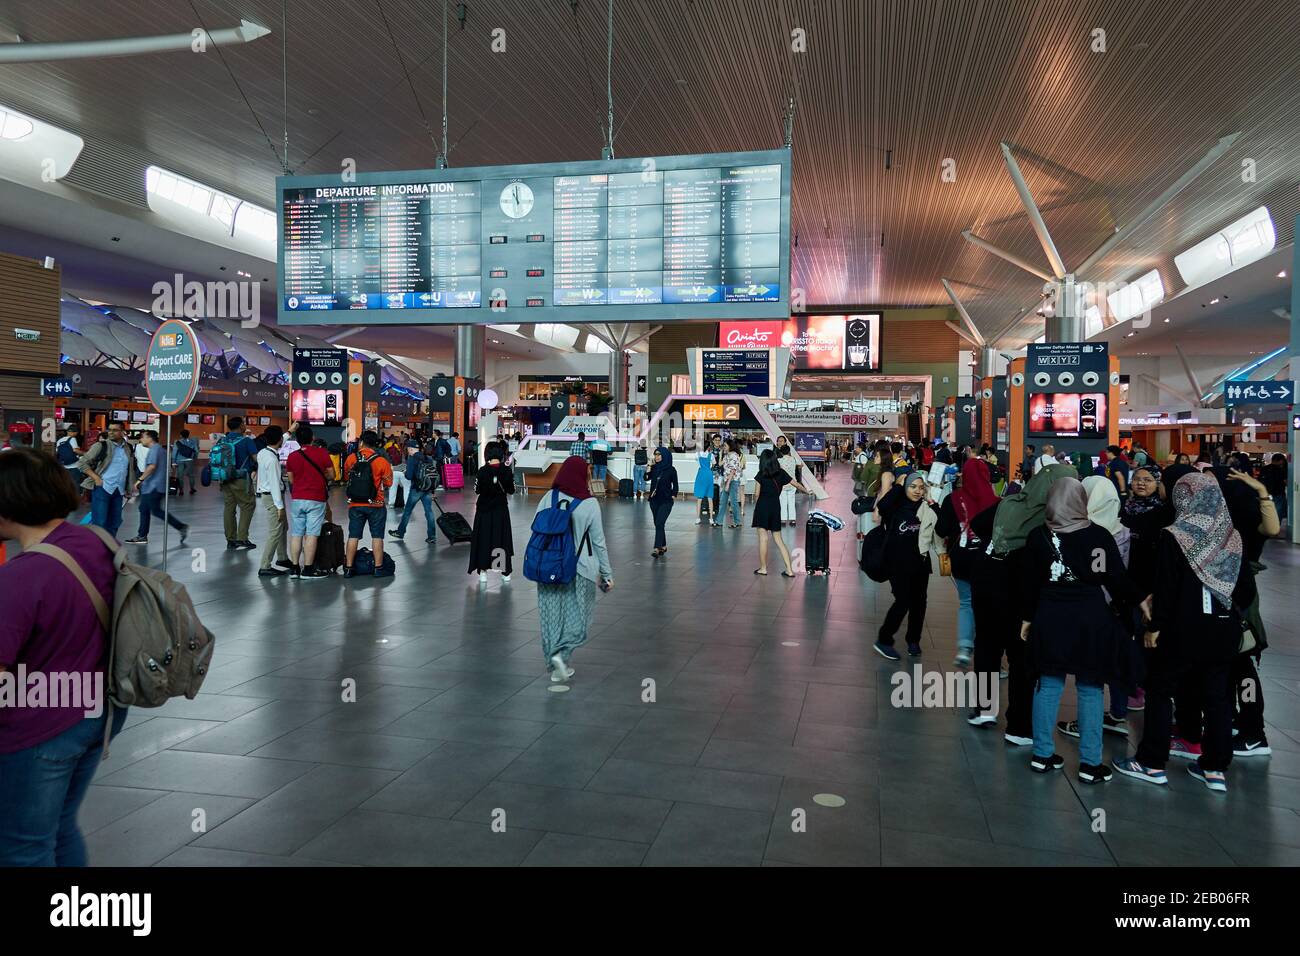 Check-in and baggage drop area at Kuala Lumpur International Airport 2 also known simply as KLIA2, Malaysia. Stock Photo